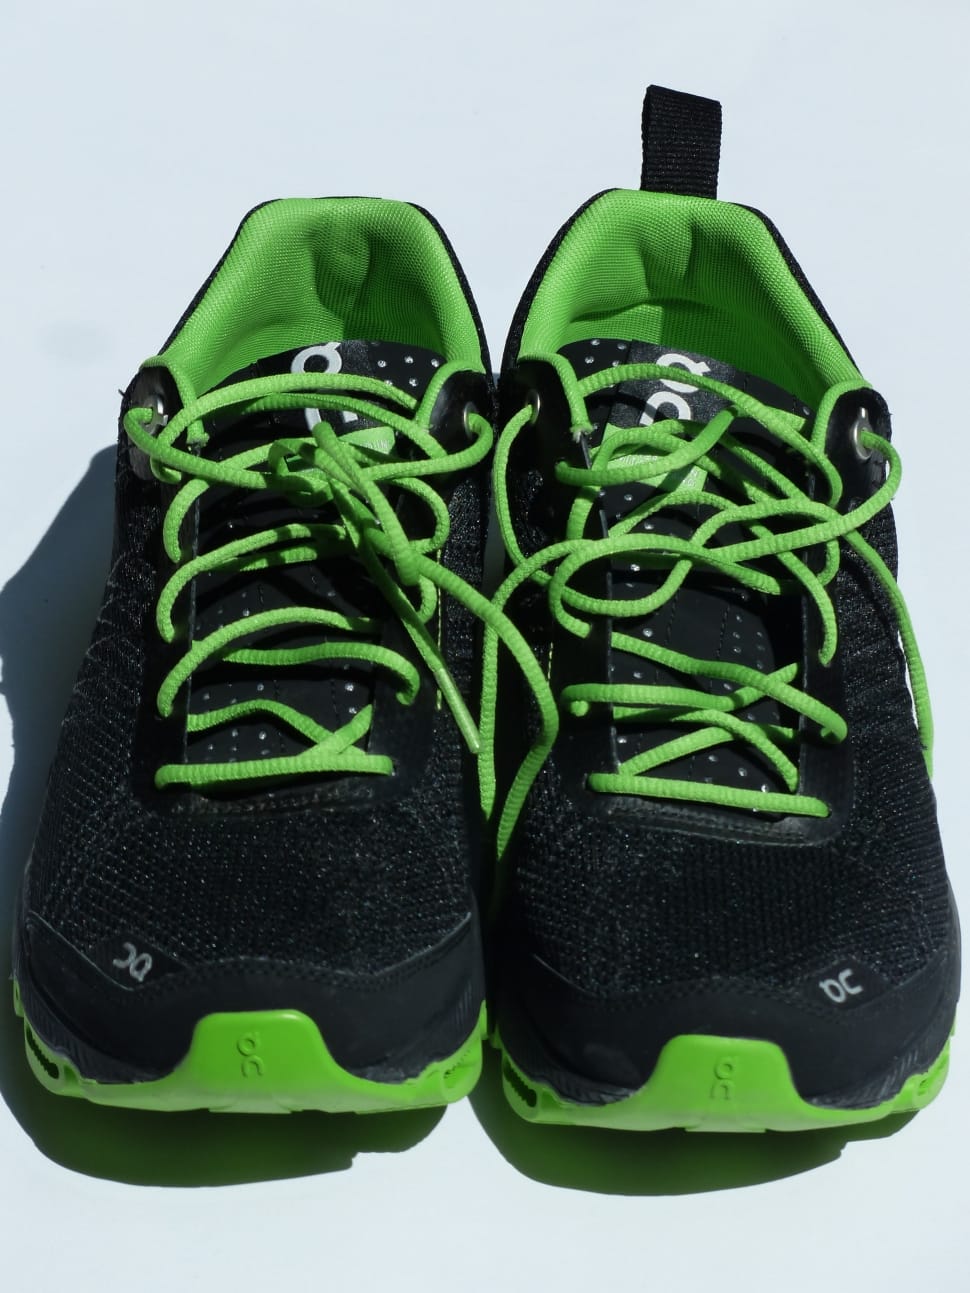 Sports Shoes, Running Shoes, Sneakers, shoe, clothing preview